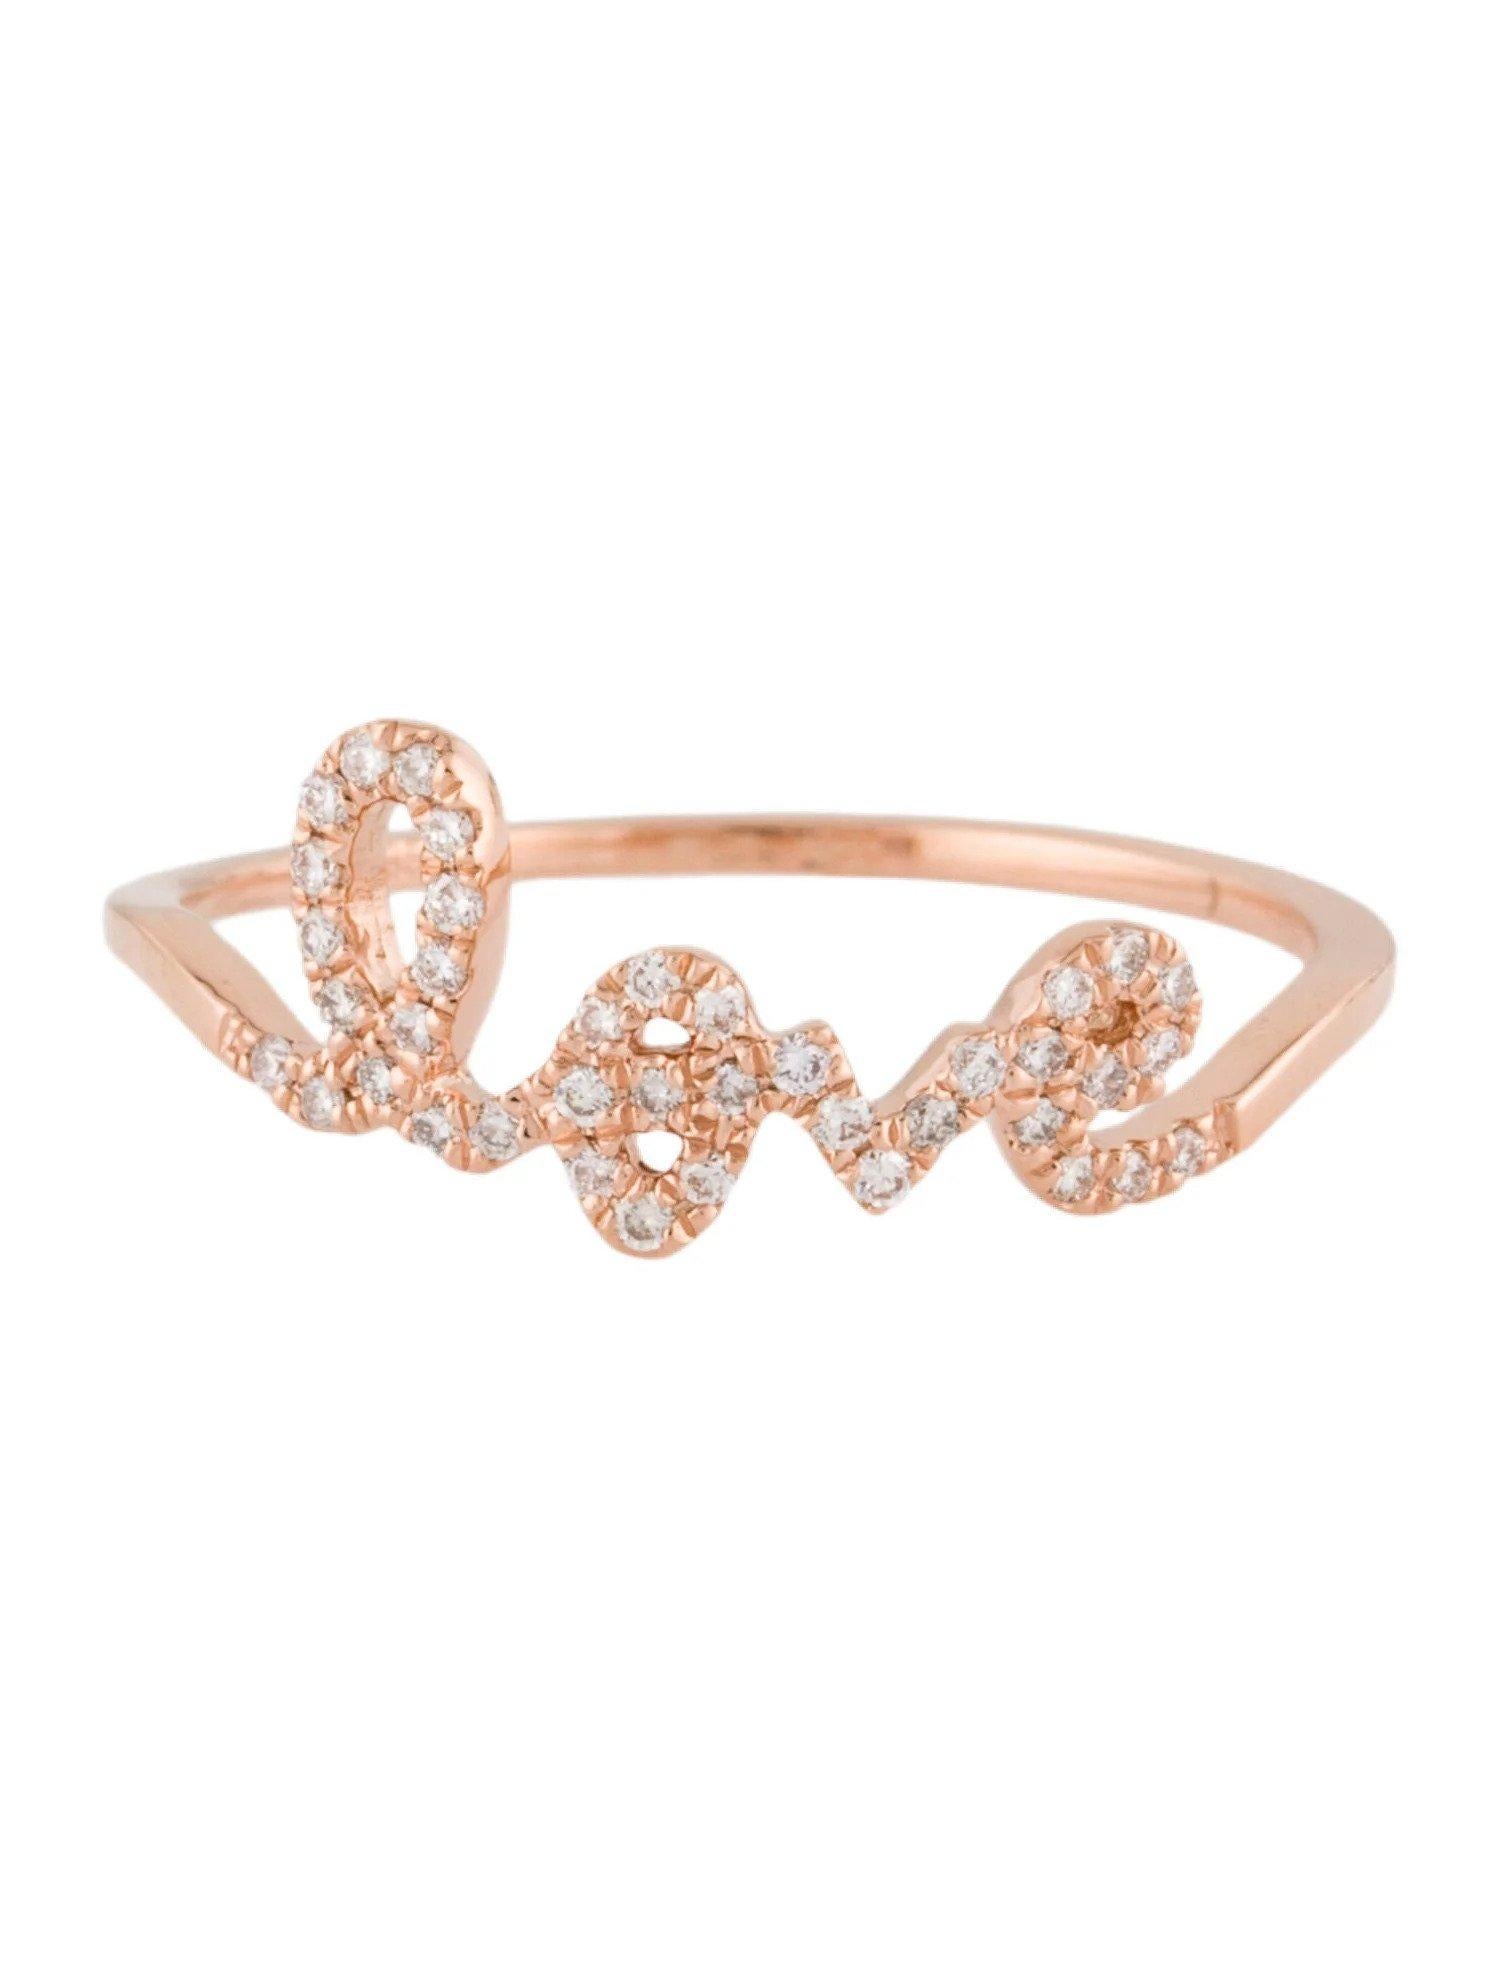 Round Cut 0.13 Carat Diamond Love Rose Gold Ring For Sale